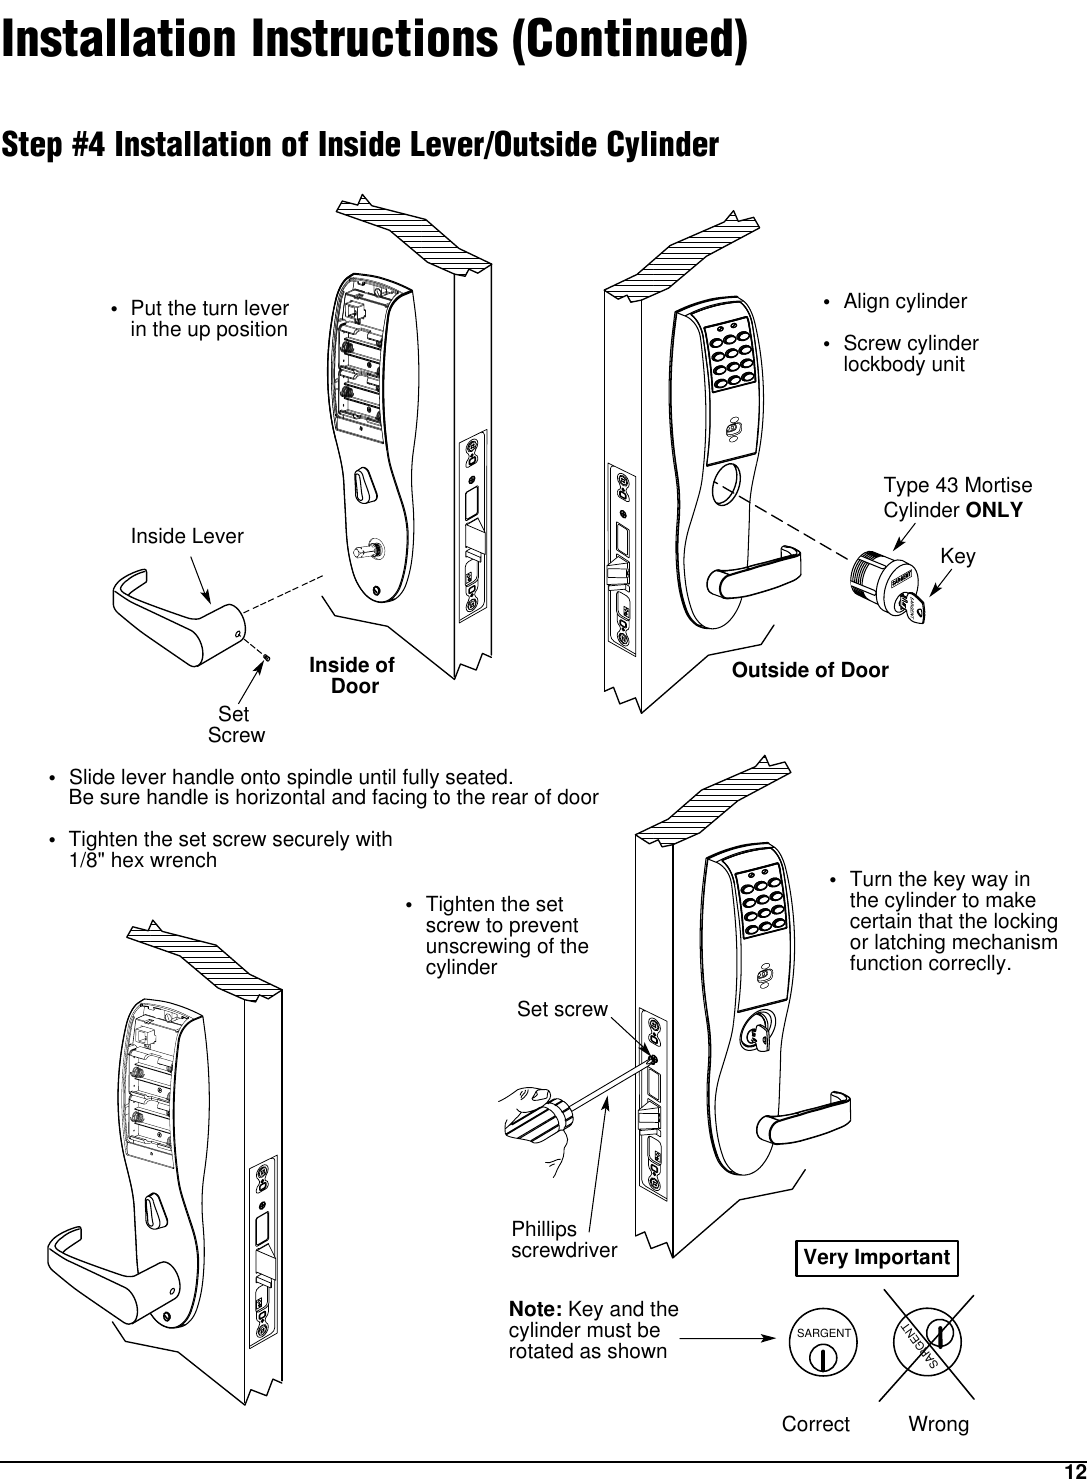 12Installation Instructions (Continued)Step #4 Installation of Inside Lever/Outside CylinderSARGENTSARGENTNote: Key and the cylinder must be rotated as shownCorrect WrongVery Important•Slide lever handle onto spindle until fully seated. Be sure handle is horizontal and facing to the rear of door•Tighten the set screw securely with 1/8&quot; hex wrench•Put the turn leverin the up position•Align cylinder •Screw cylinder lockbody unit•Tighten the set screw to preventunscrewing of the cylinder•Turn the key way in the cylinder to make certain that the locking or latching mechanism function correclly.Outside of DoorType 43 MortiseCylinder ONLYKeyInside of Door•Set ScrewInside LeverPhillips screwdriverSet screw